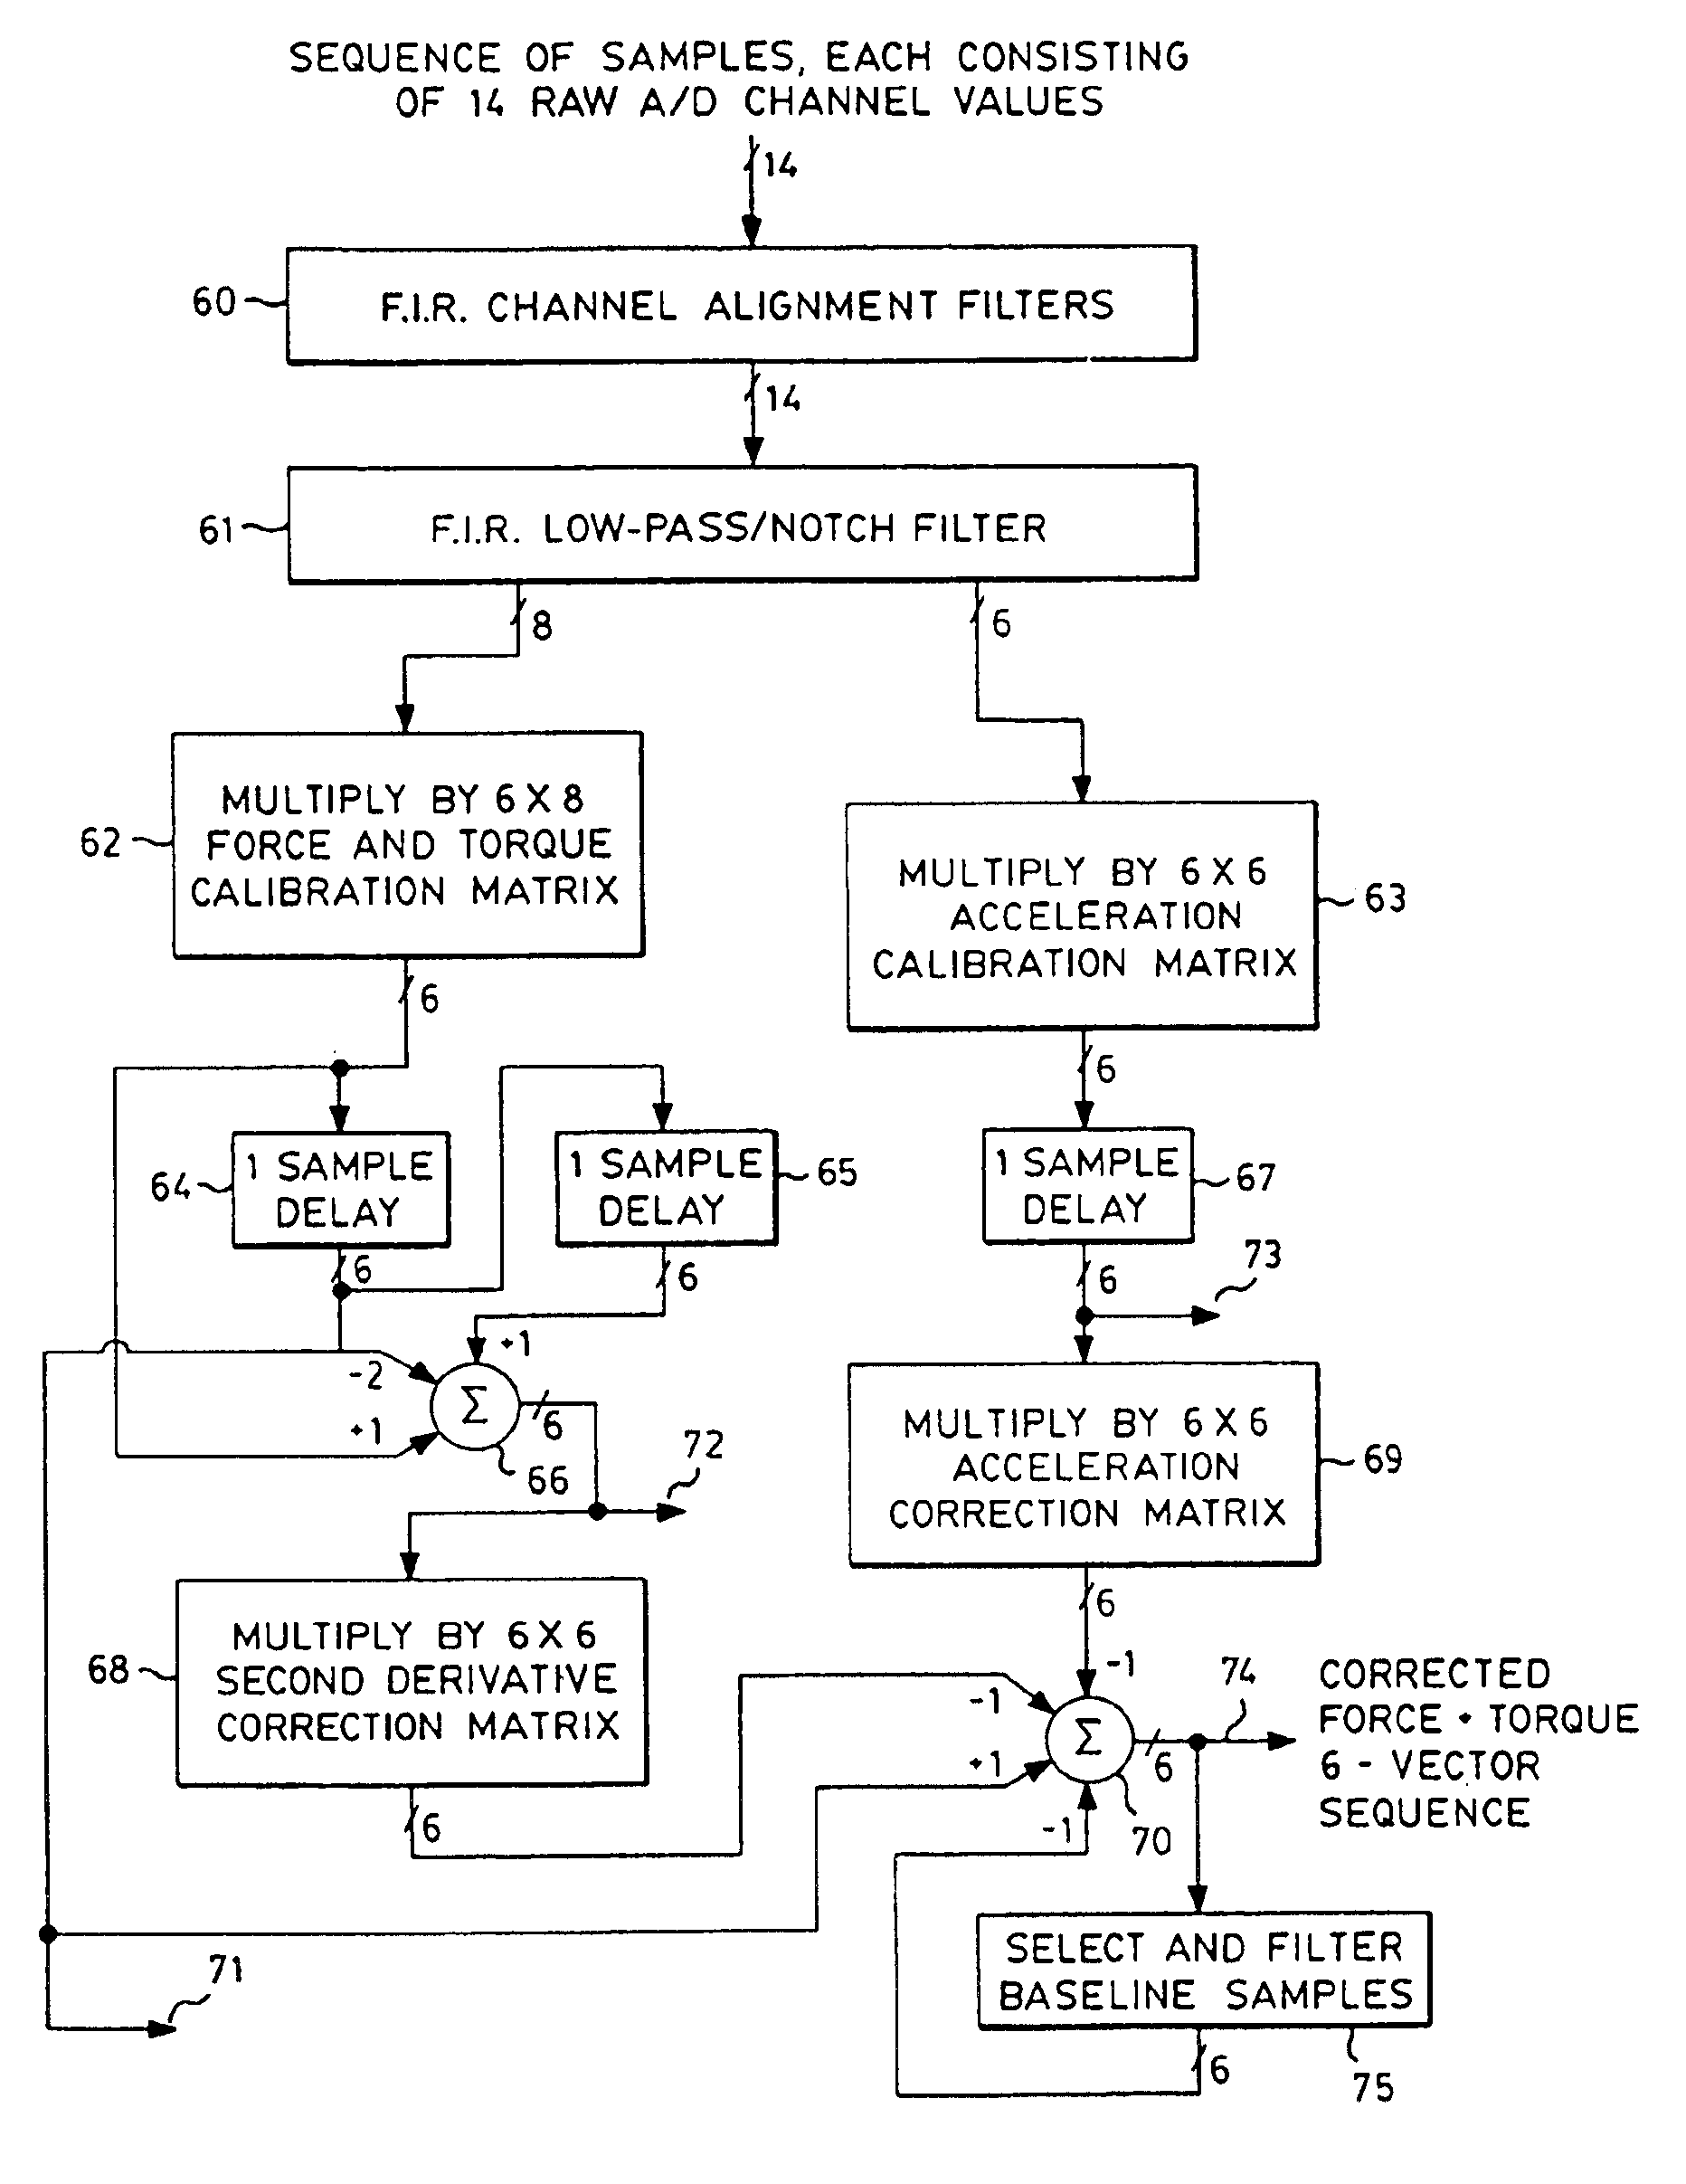 Force measurement system correcting for inertial interference